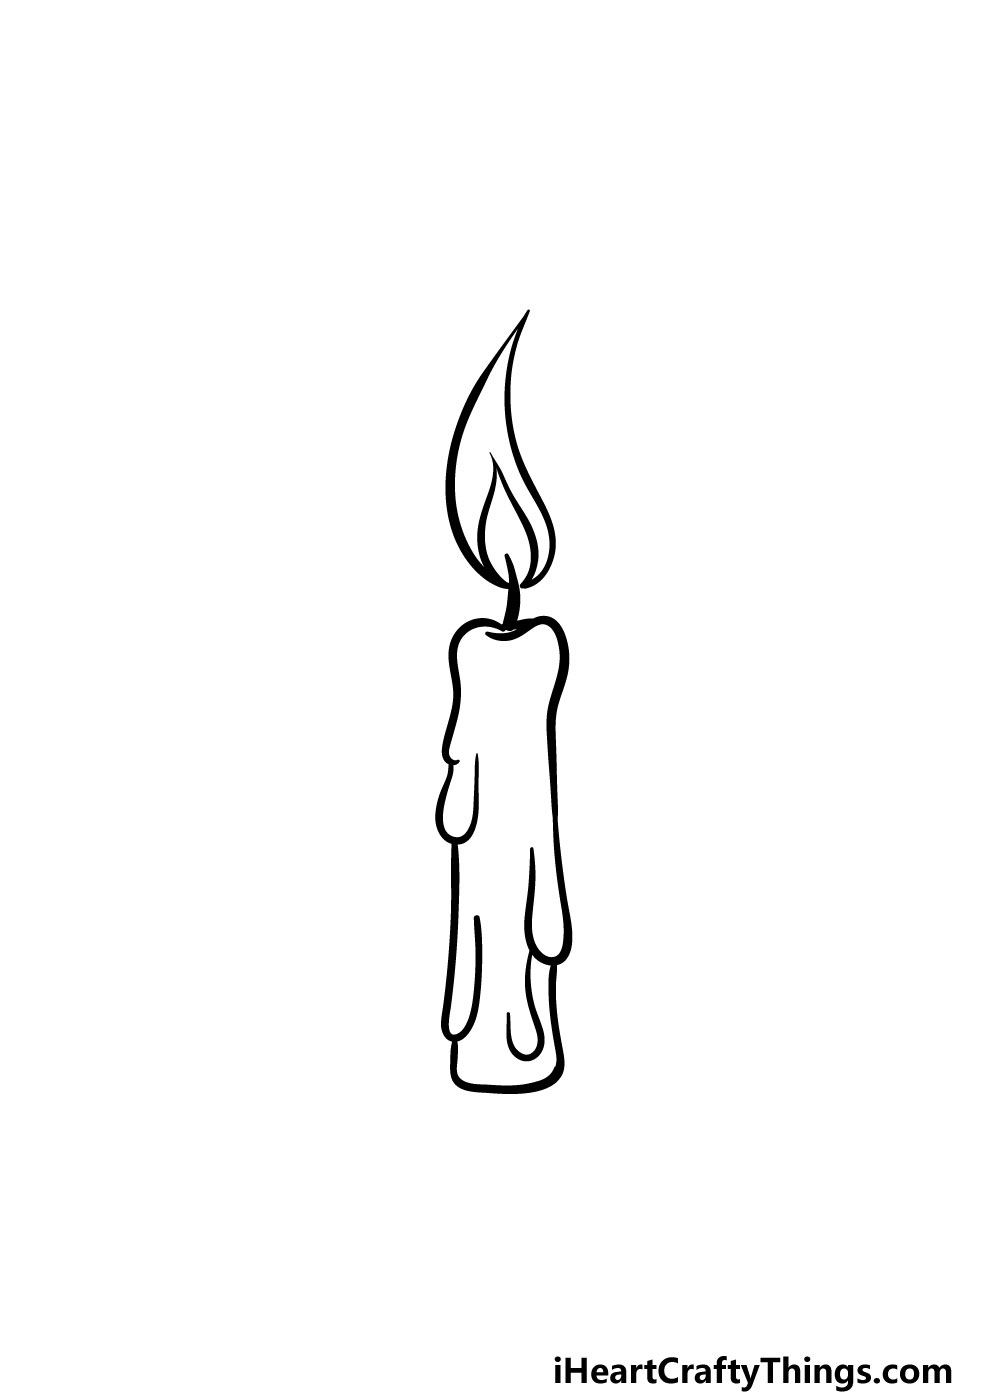 Candle Drawing Sketch